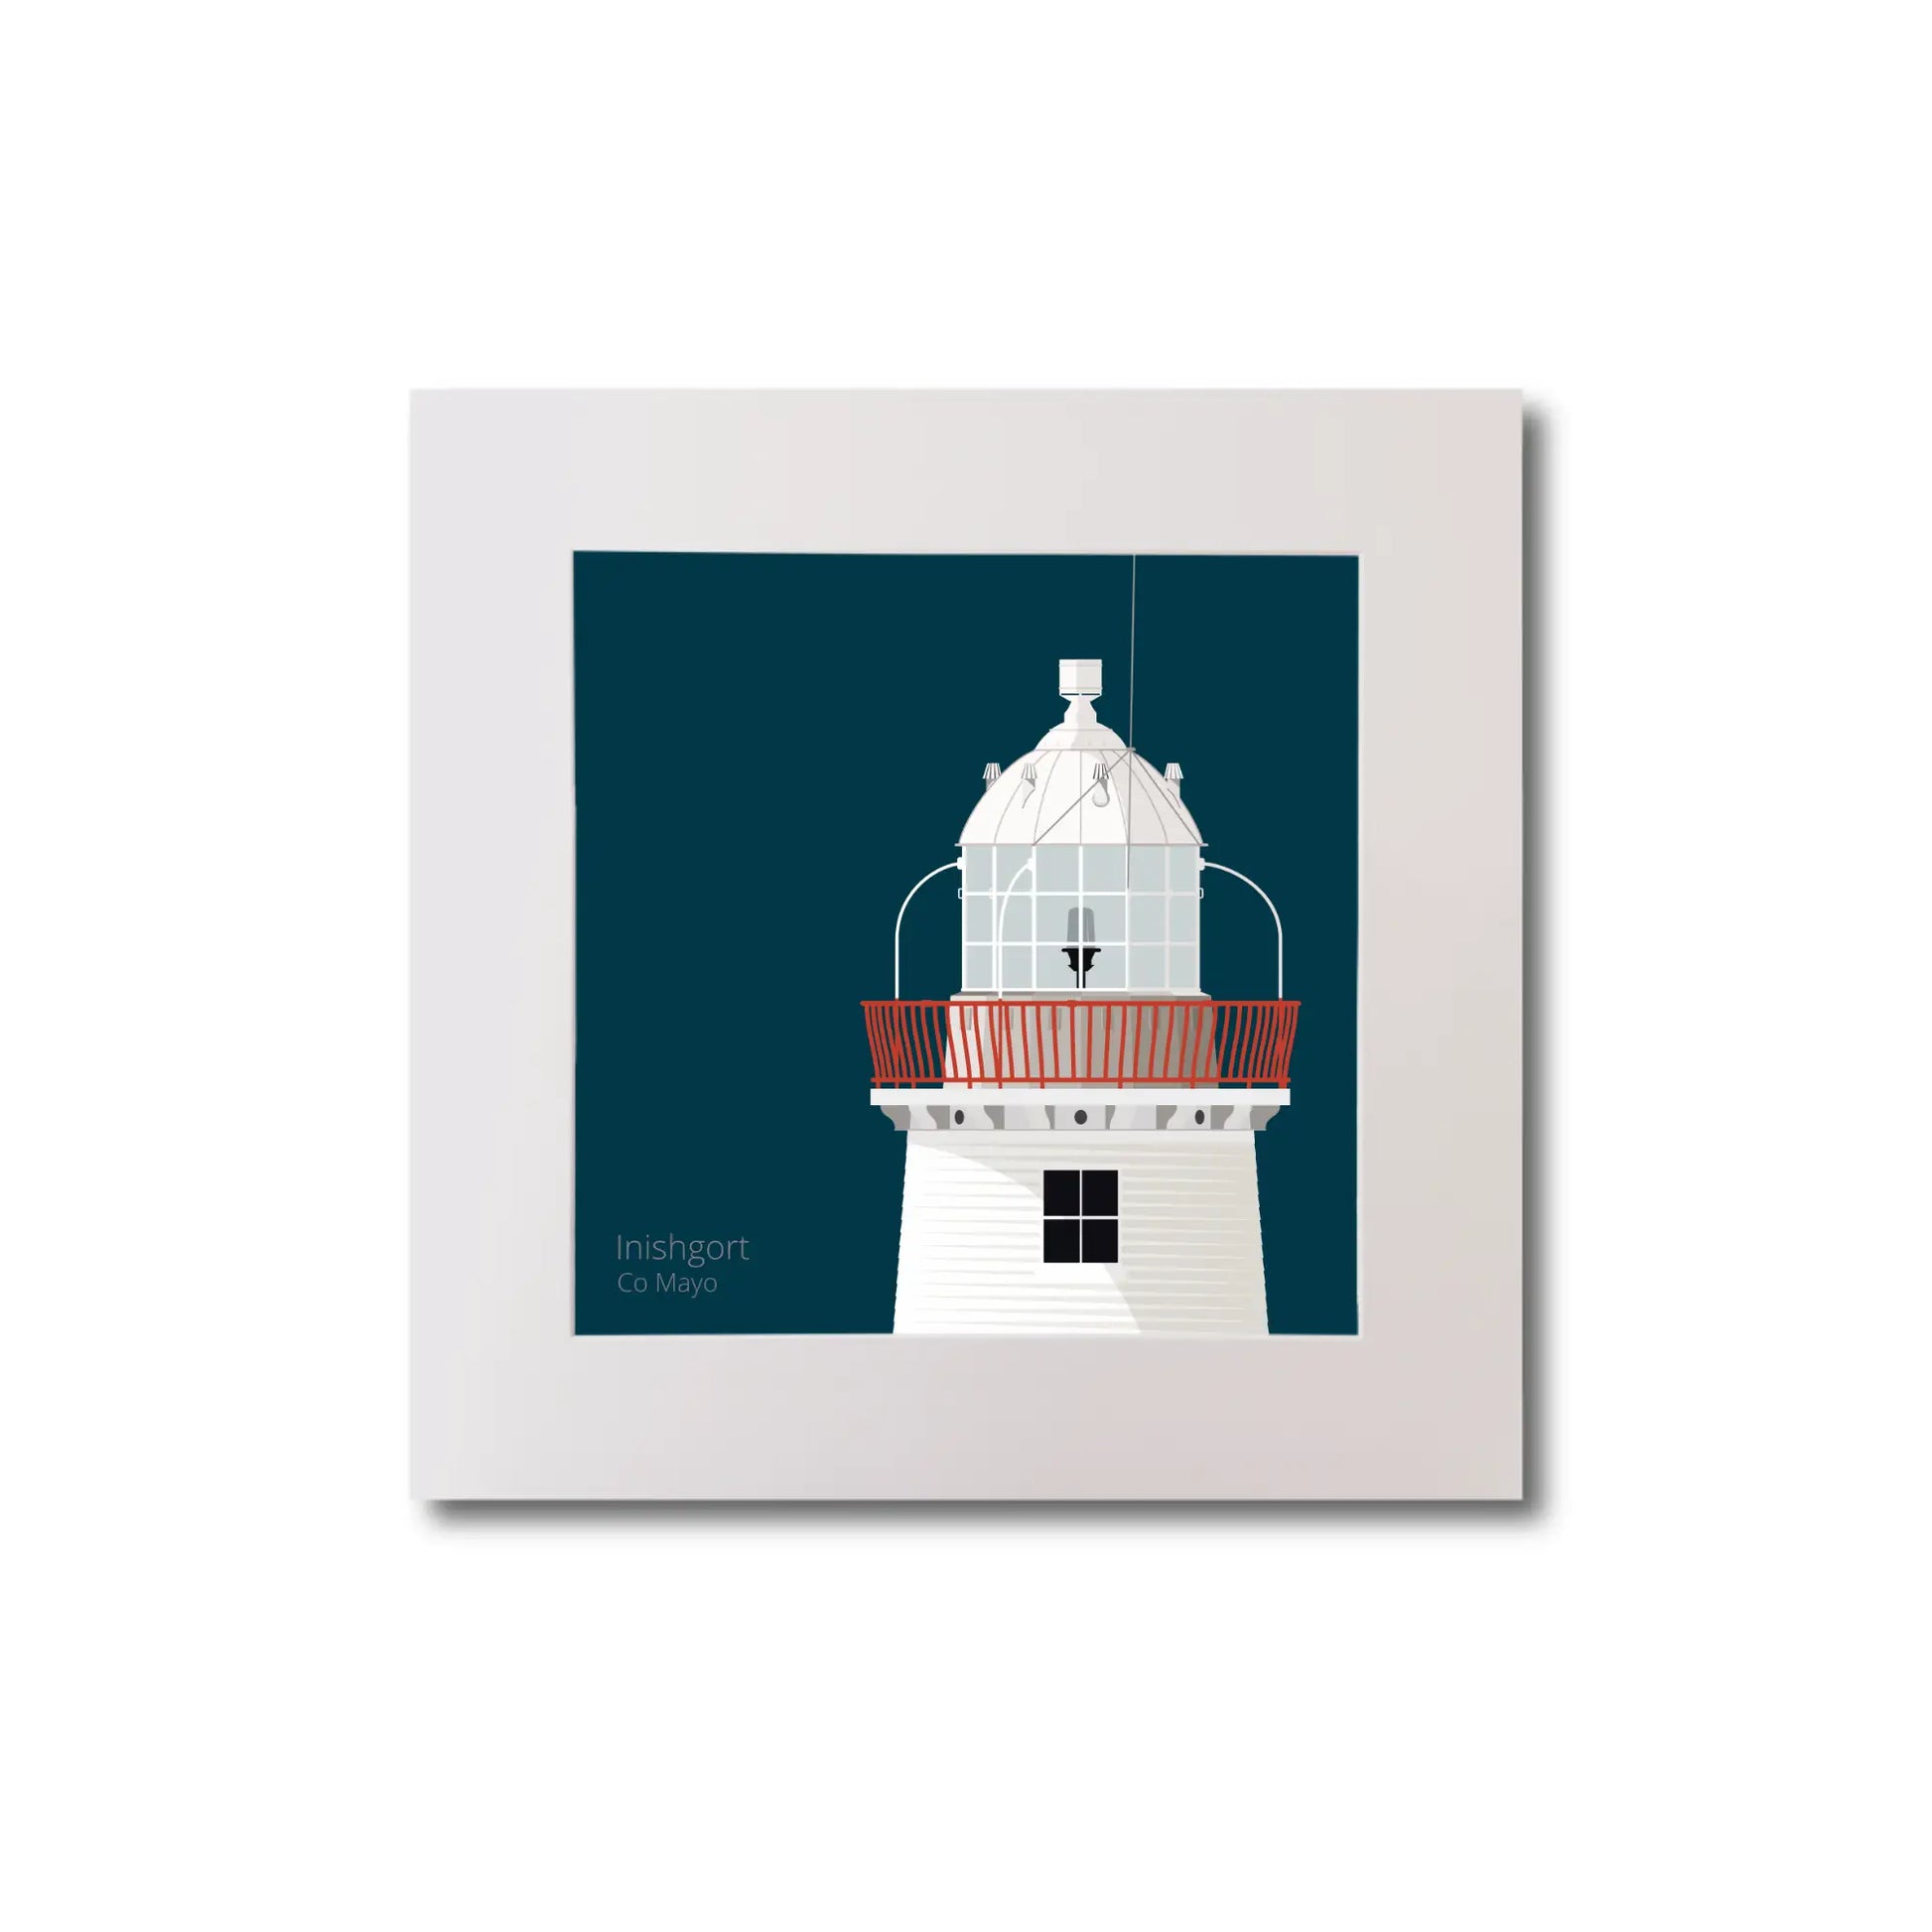 Illustration of Inishgort lighthouse on a midnight blue background, mounted and measuring 20x20cm.